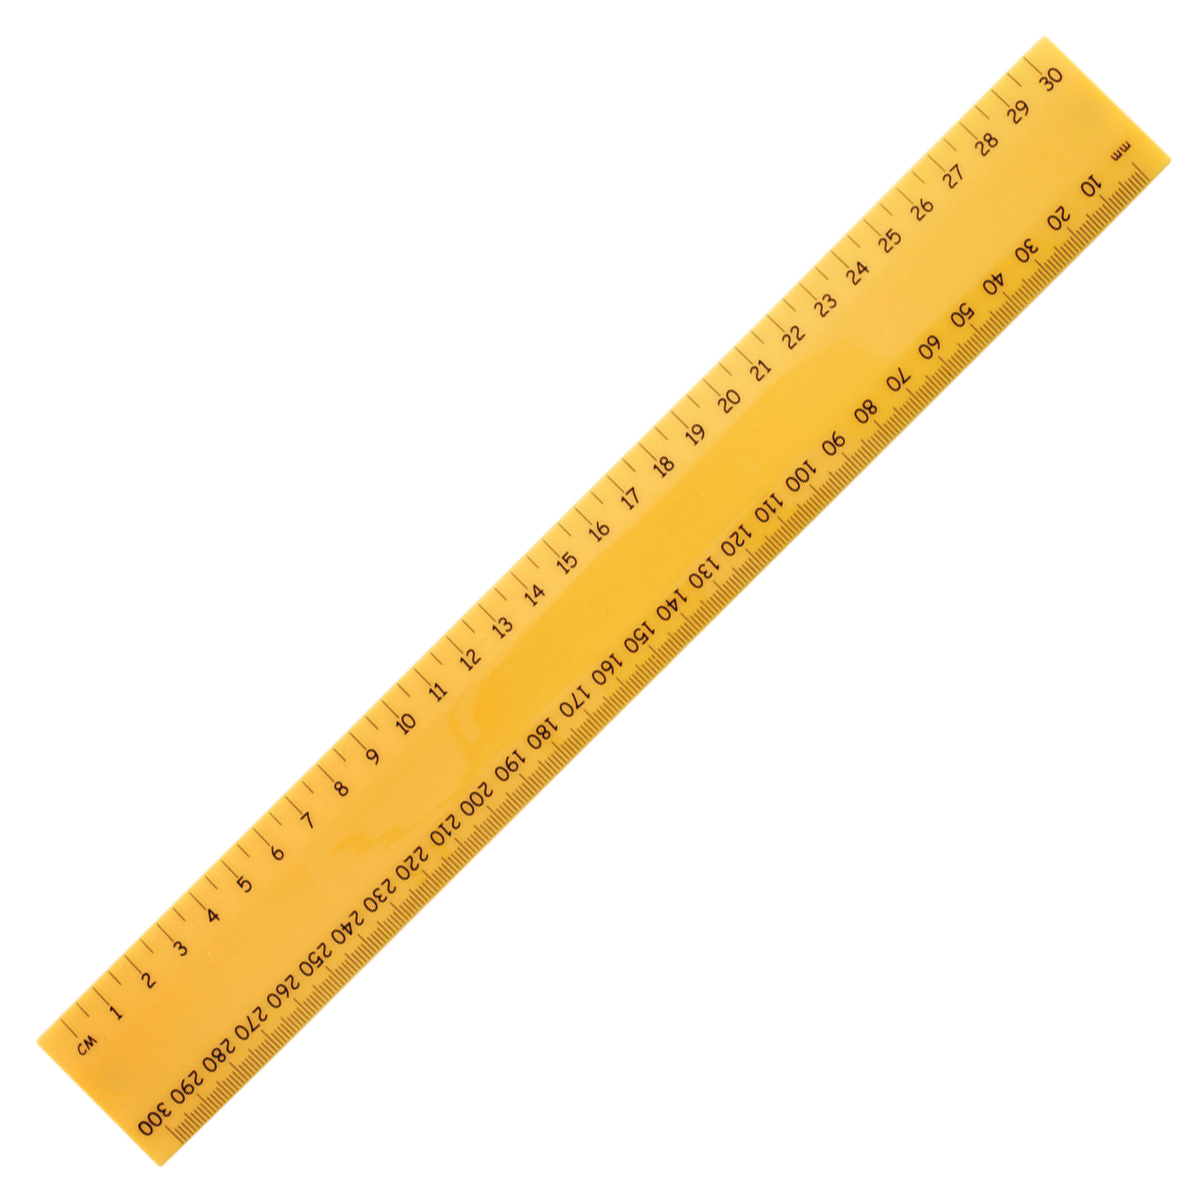 free clipart images ruler - photo #41